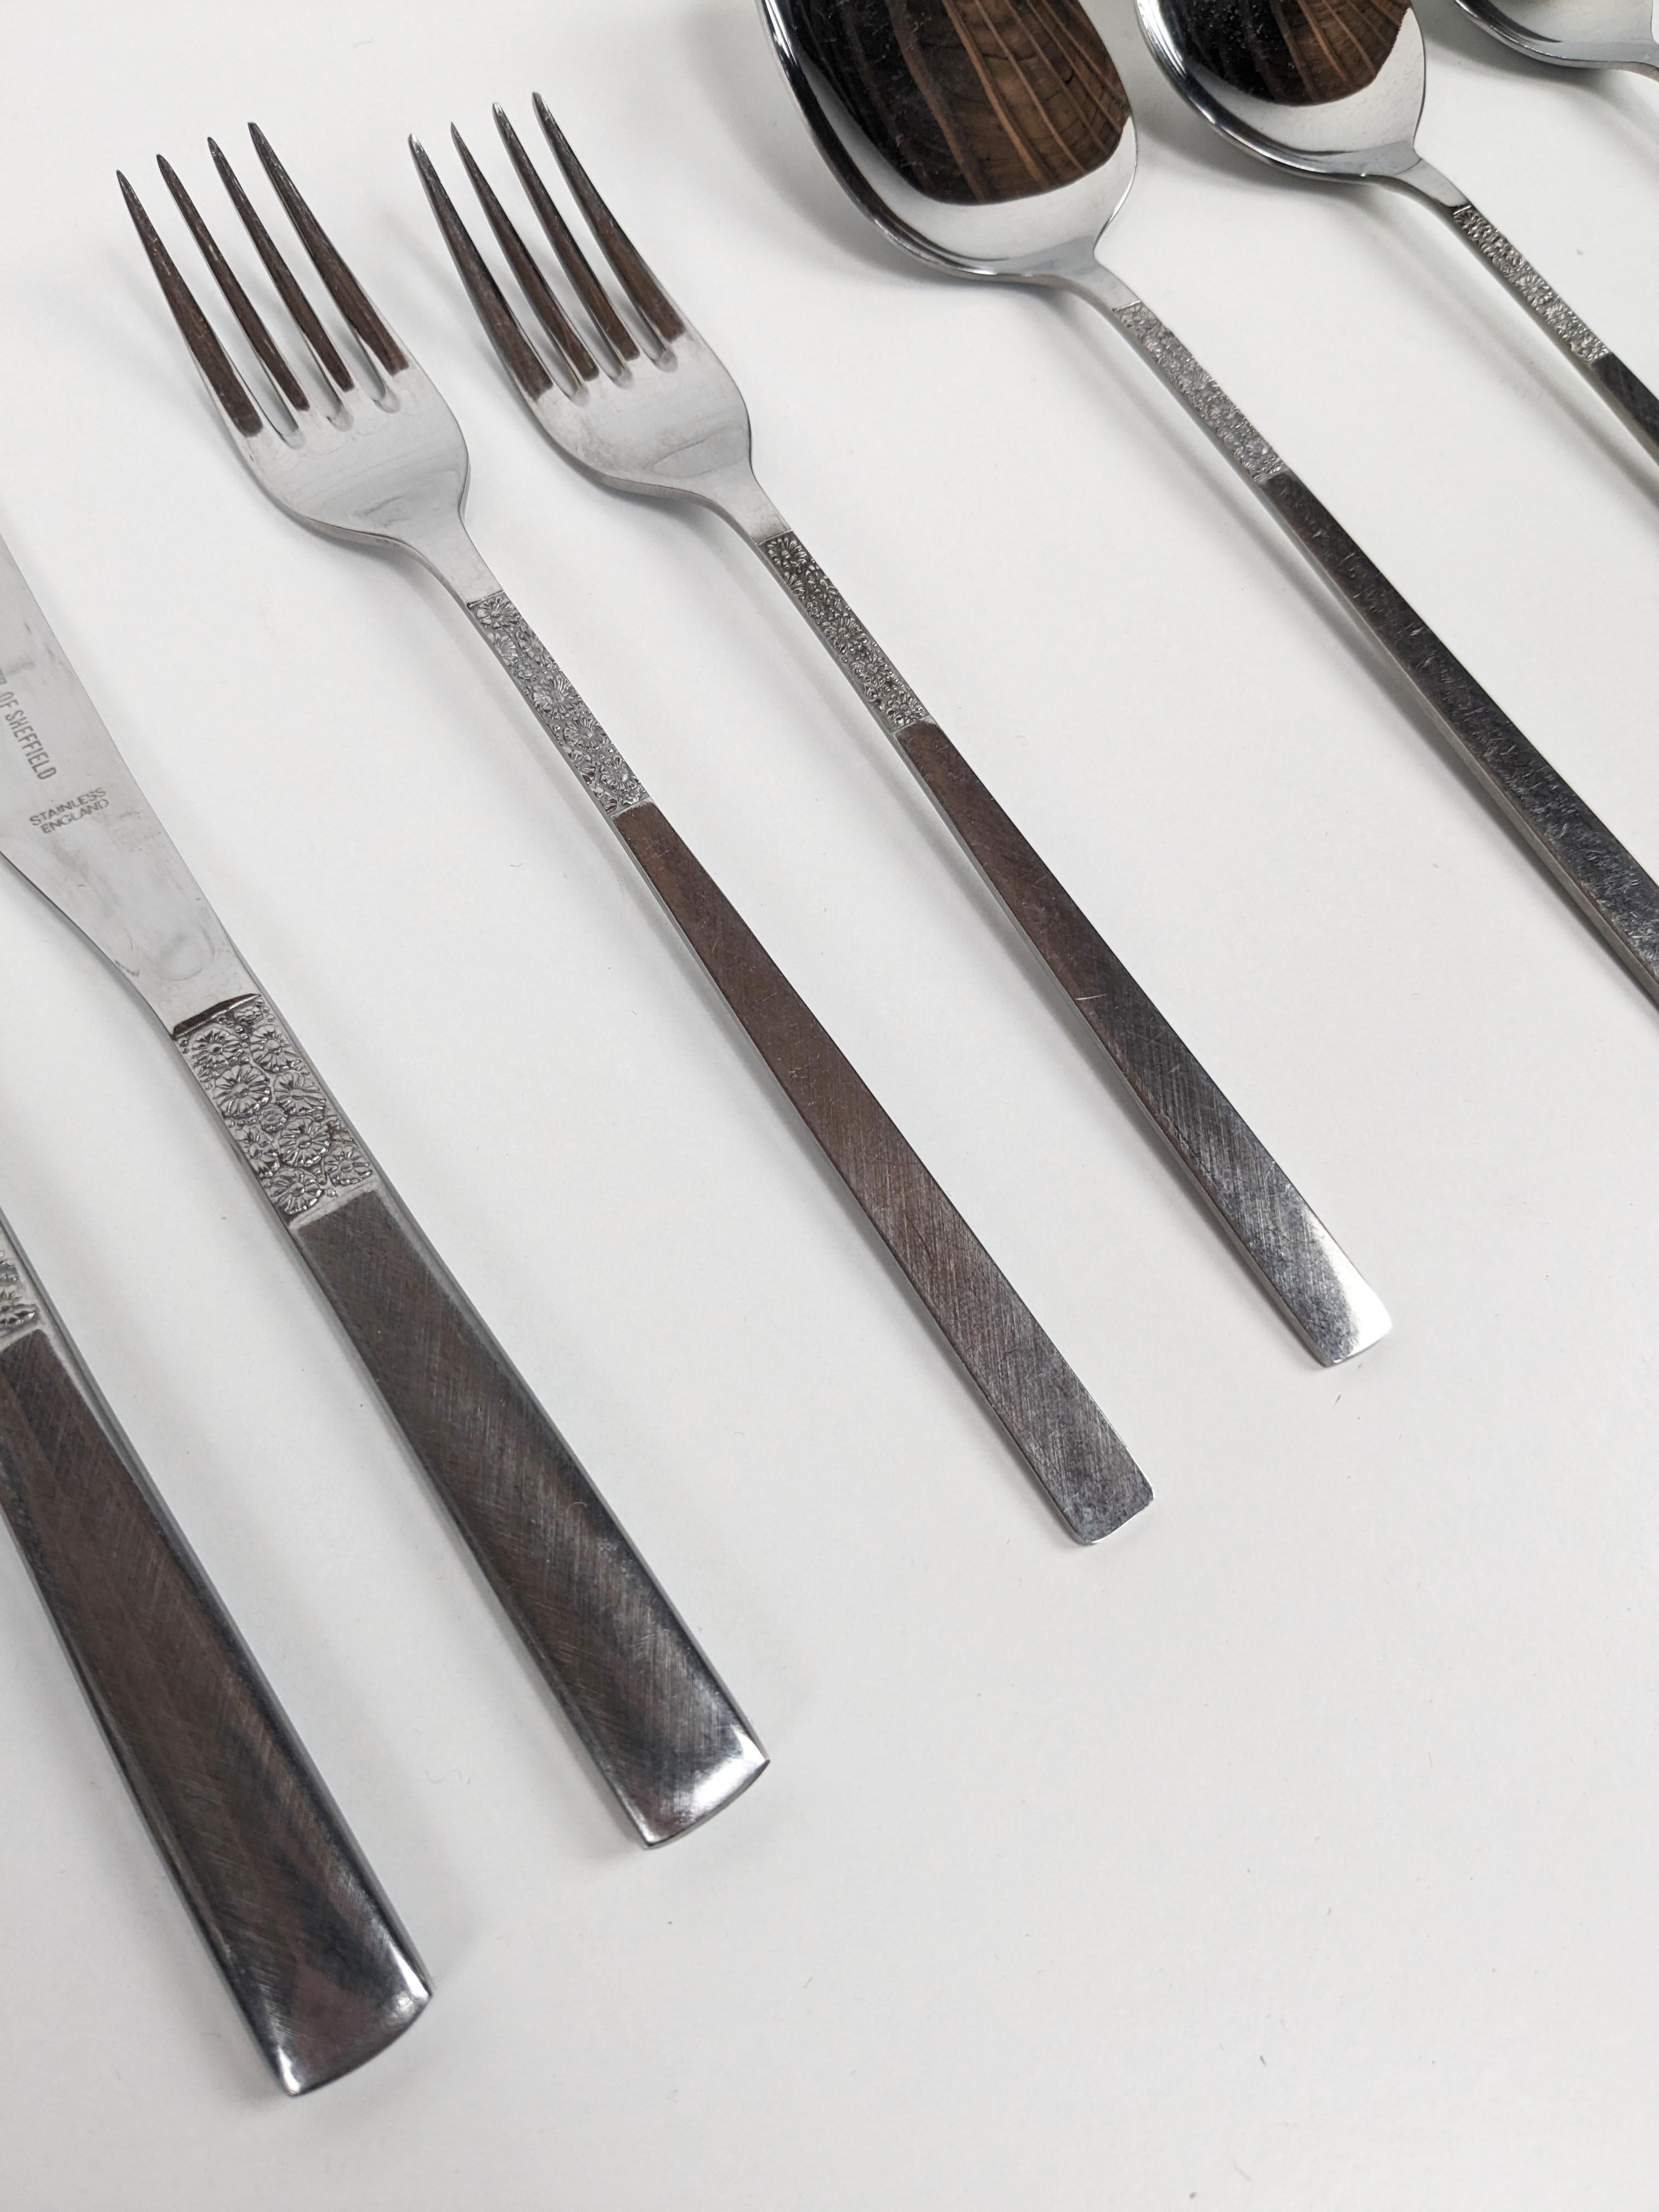 Stainless Steel Viners ‘Love Story’ cutlery, Presentation set, stainless steel, 44 pc, 1970s